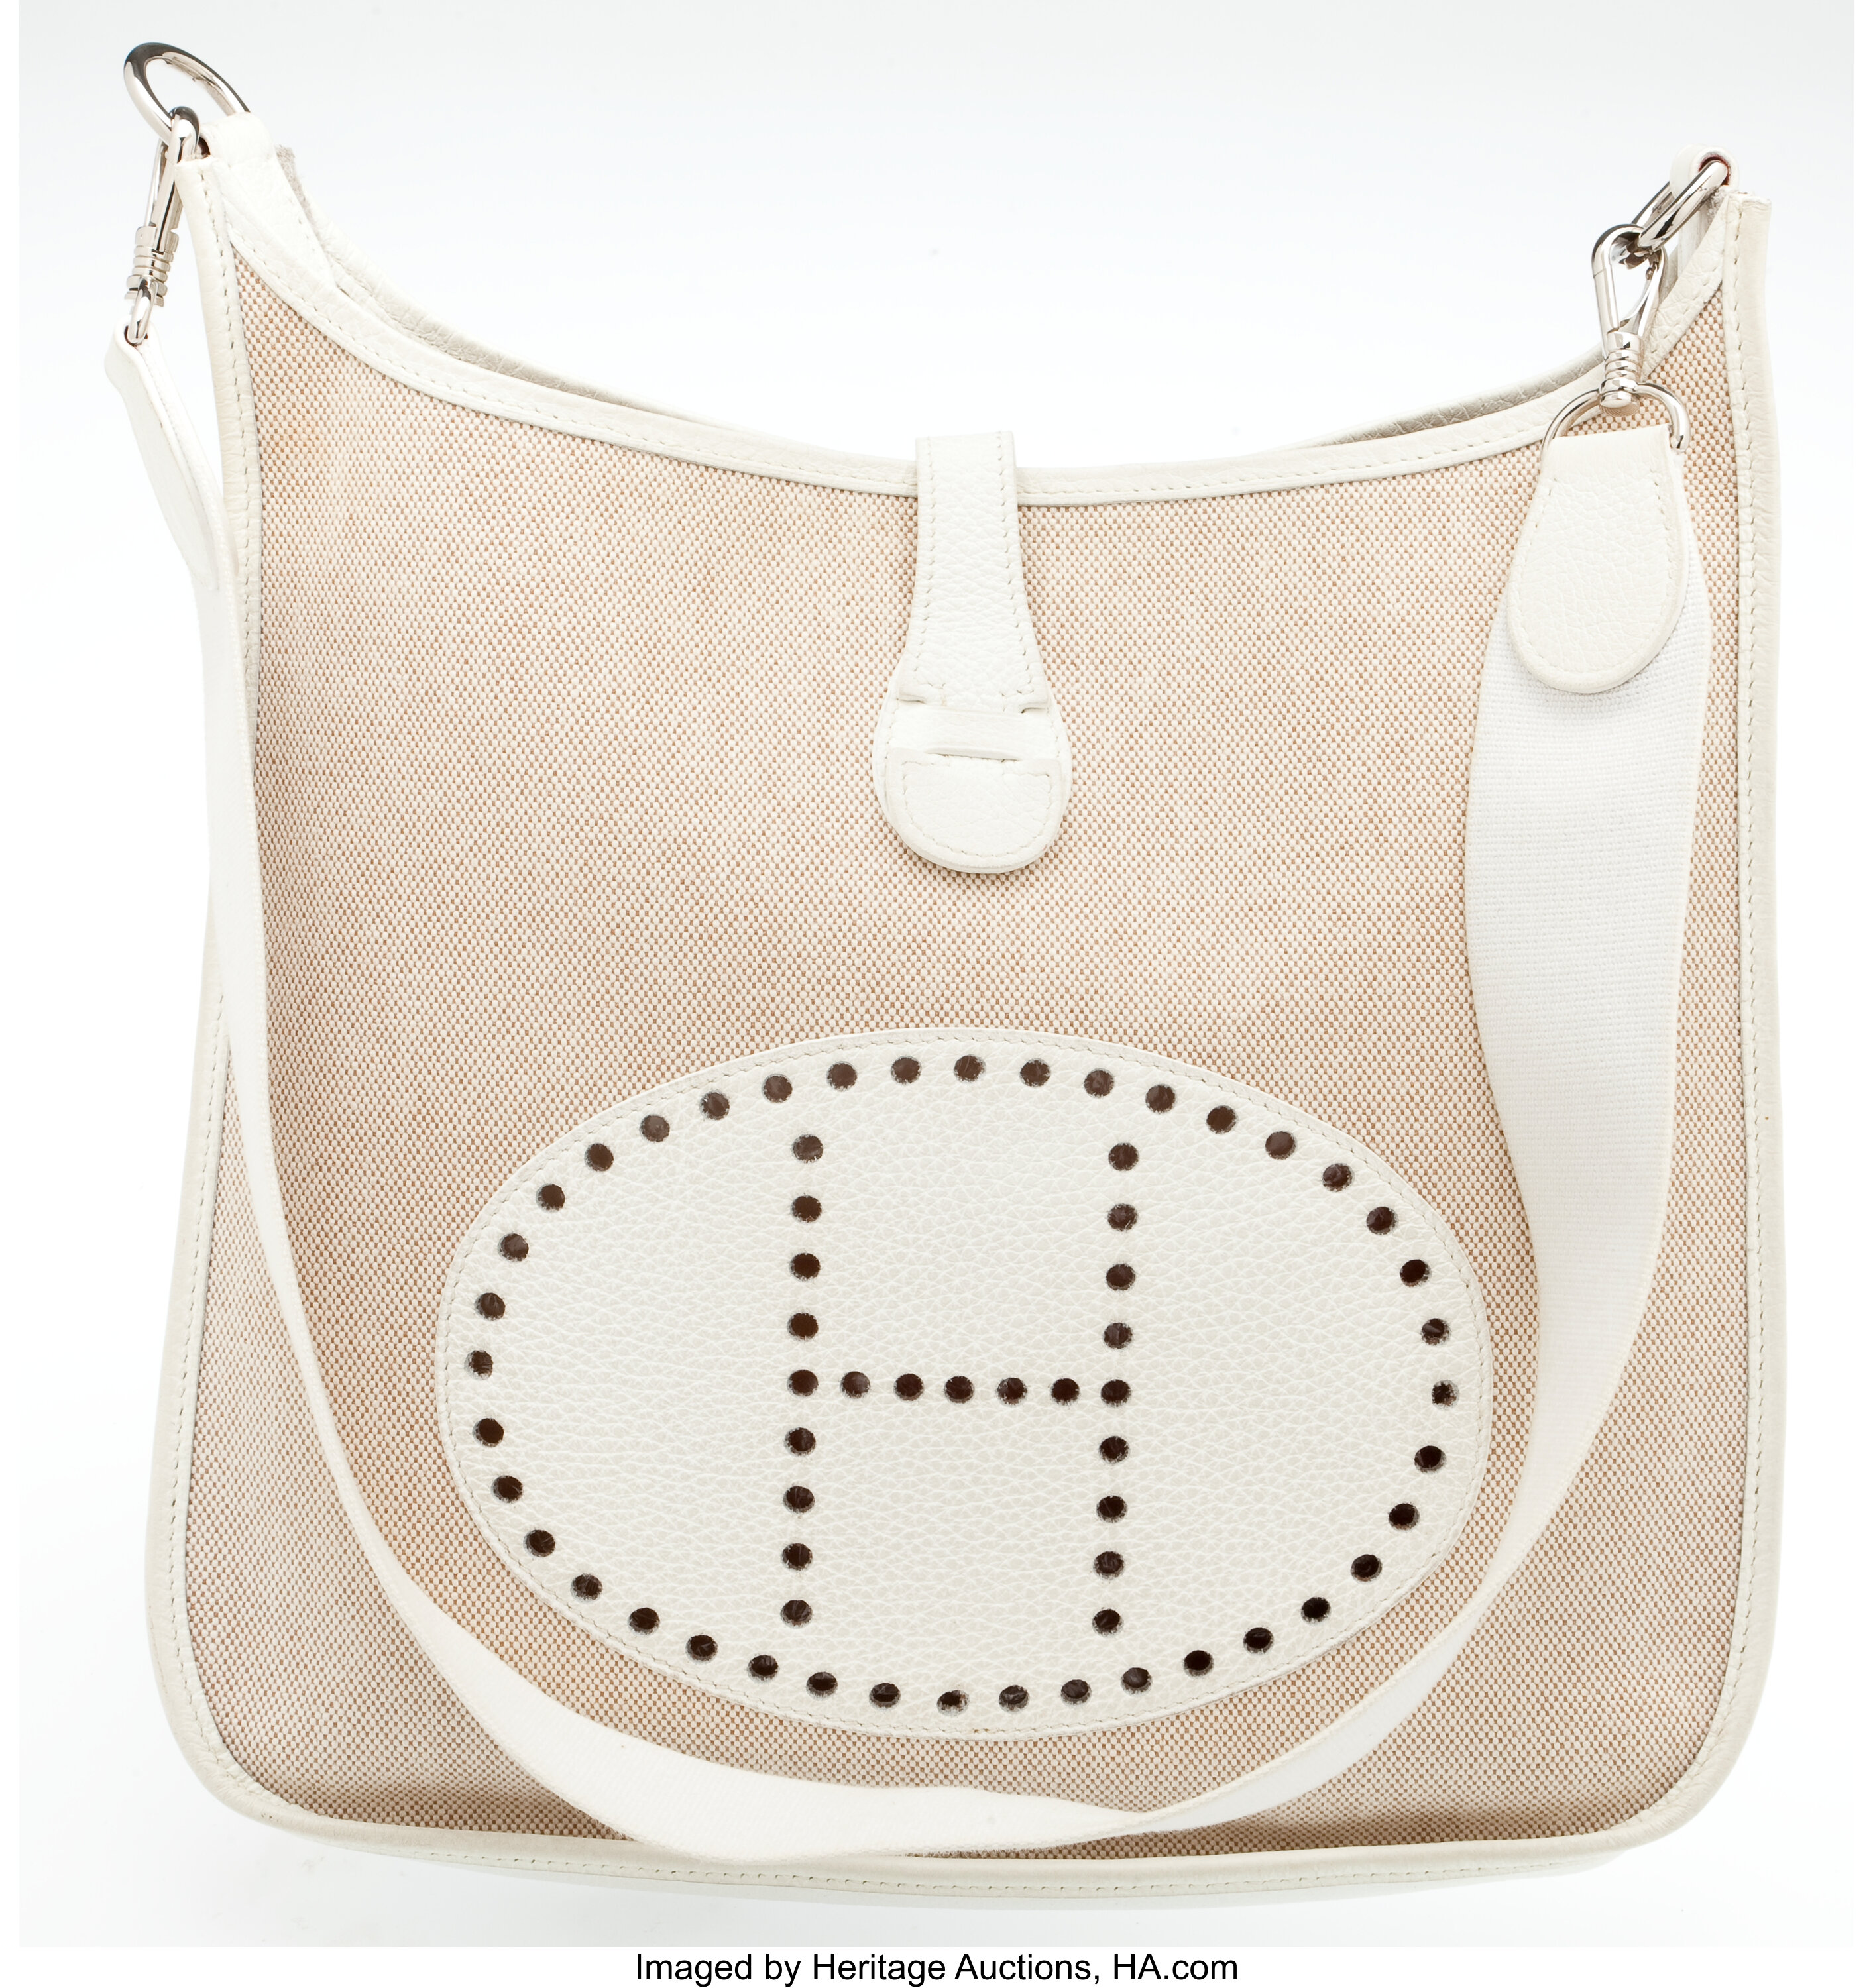 Pictured is a Hermes Evelyne that - Hyper Bag Spa - HBS